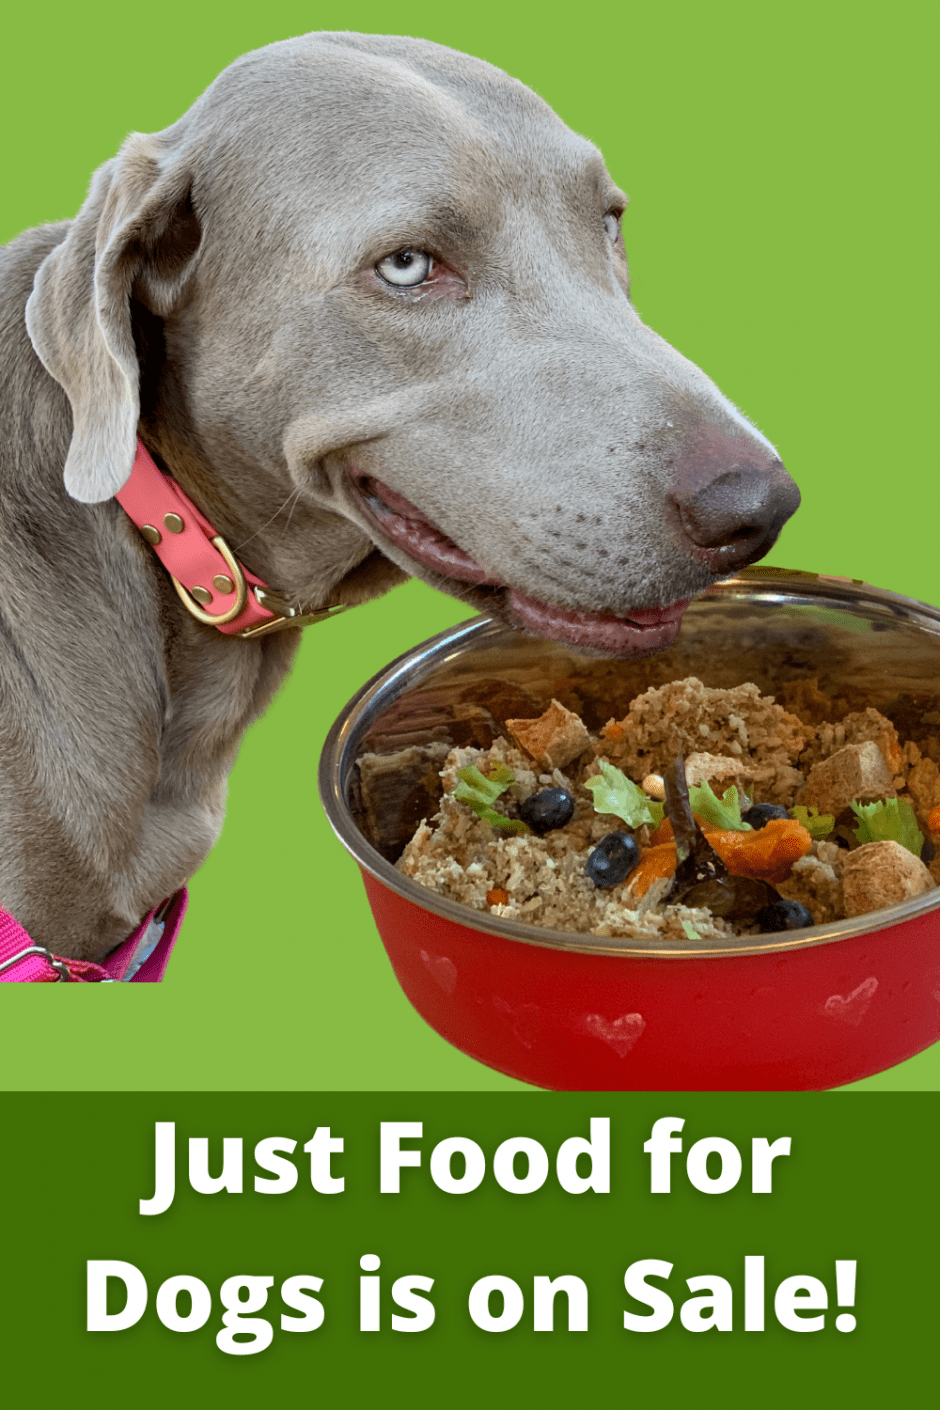 Just Food for Dogs is on Sale